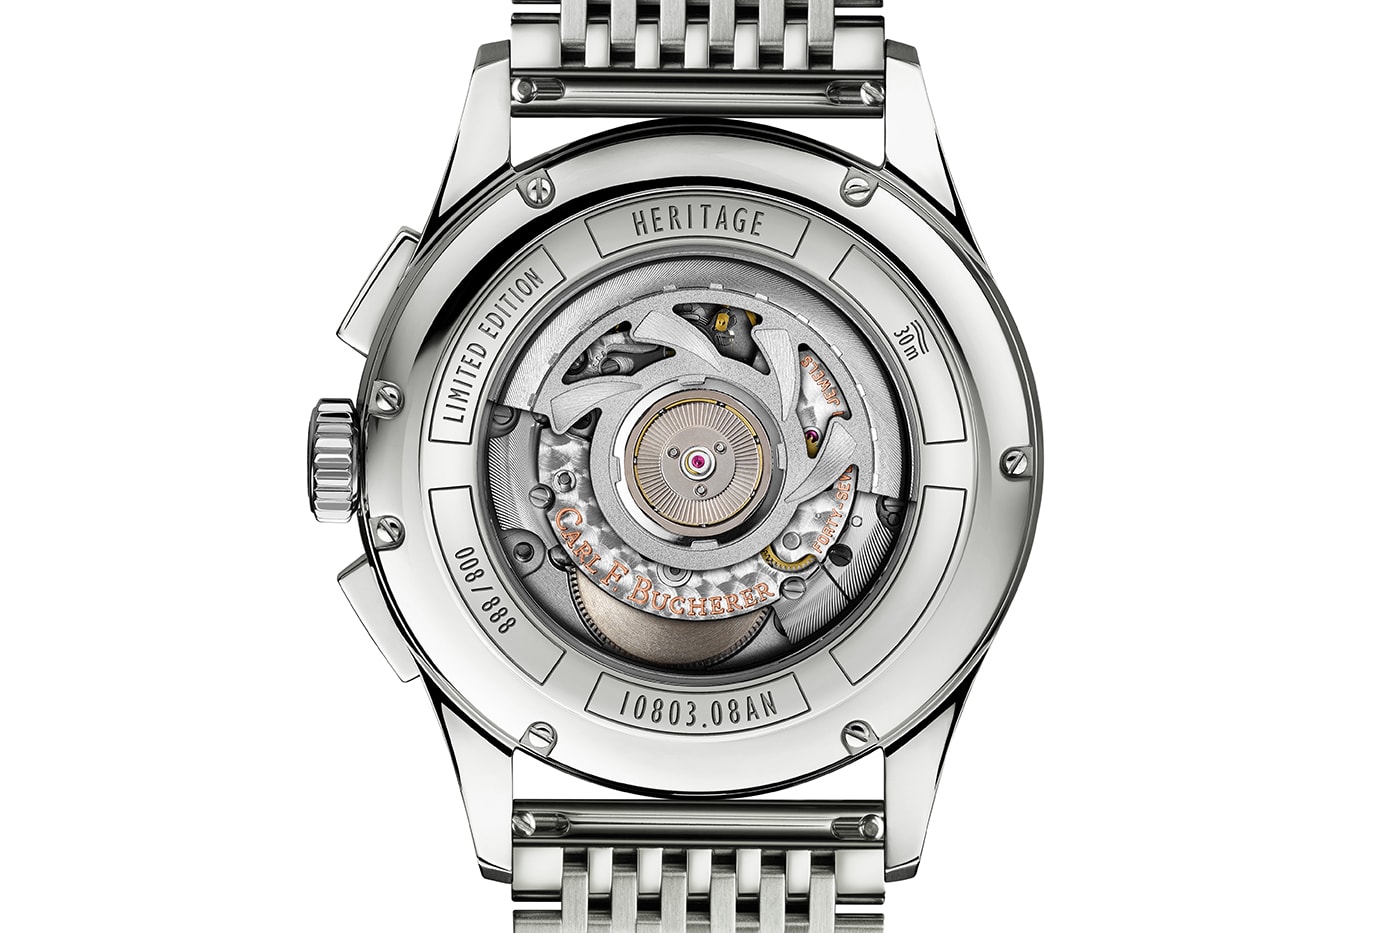 Carl F. Bucherer Heritage Bicompax Annual Release Limited Edition Info